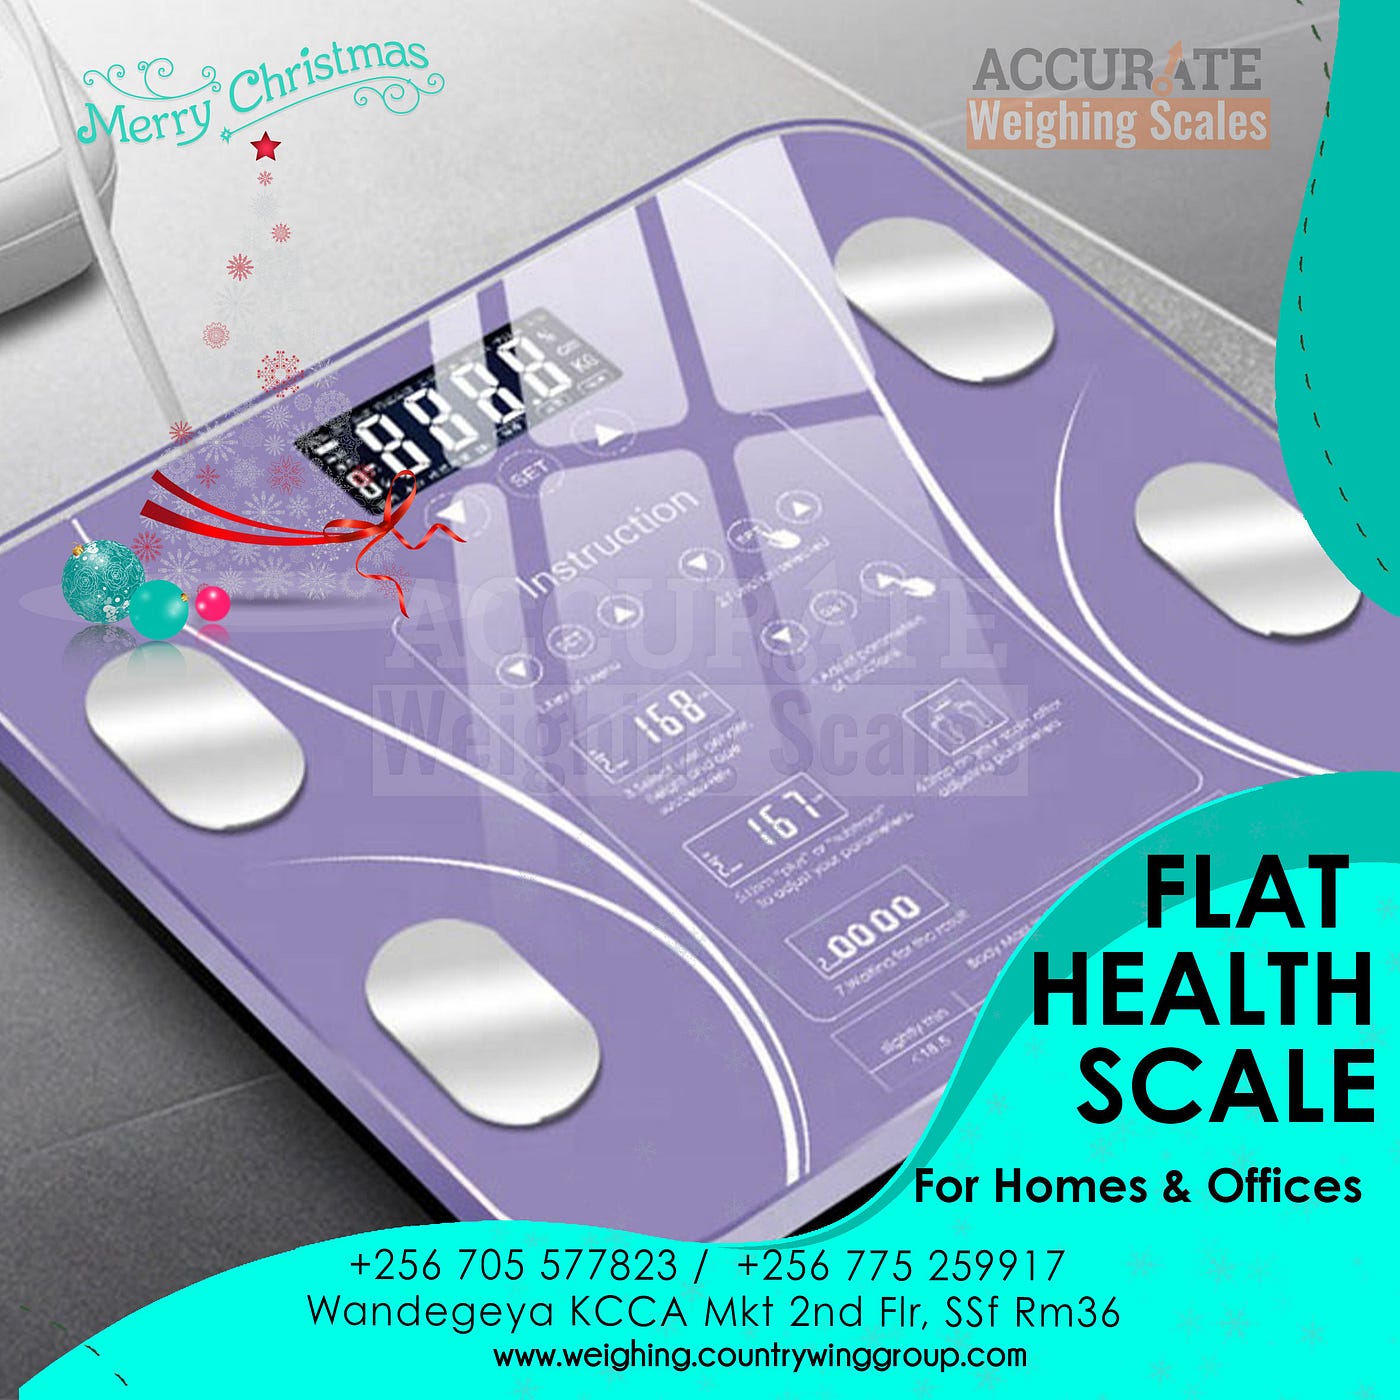 How much is a bathroom medical weighing scales in Kampala Uganda?